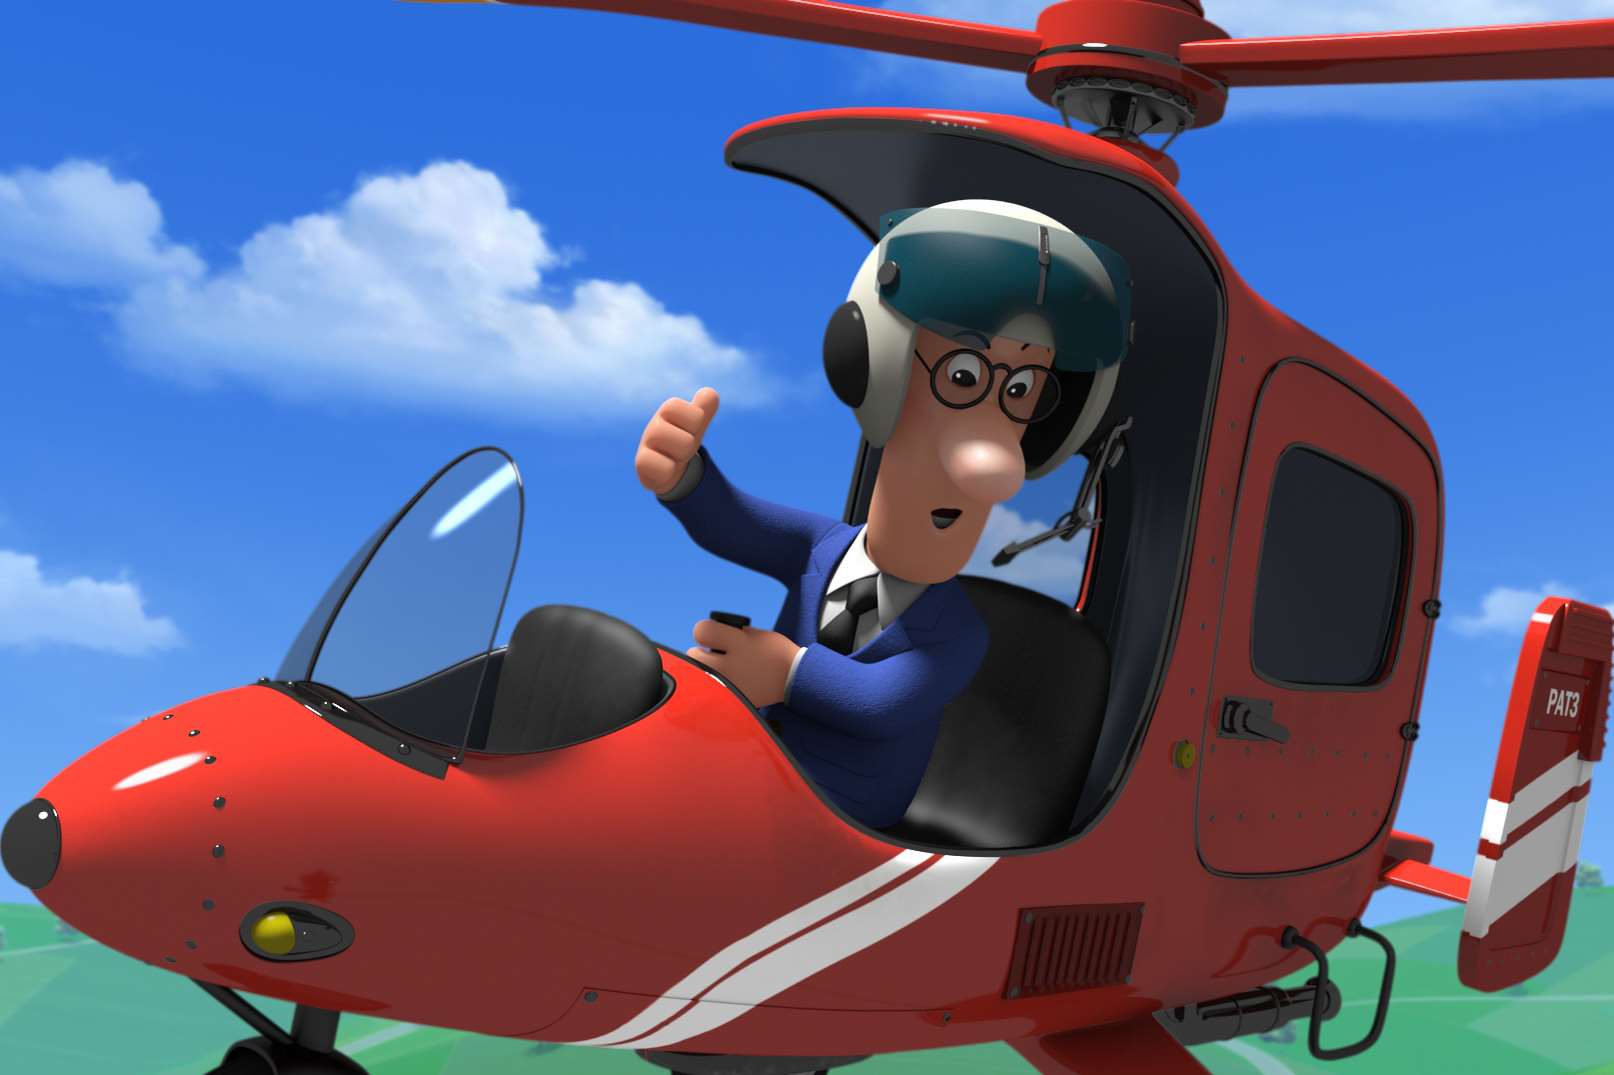 Postman Pat (voiced by Stephen Mangan), in Postman Pat: The Movie. Picture: PA Photo/Lionsgate